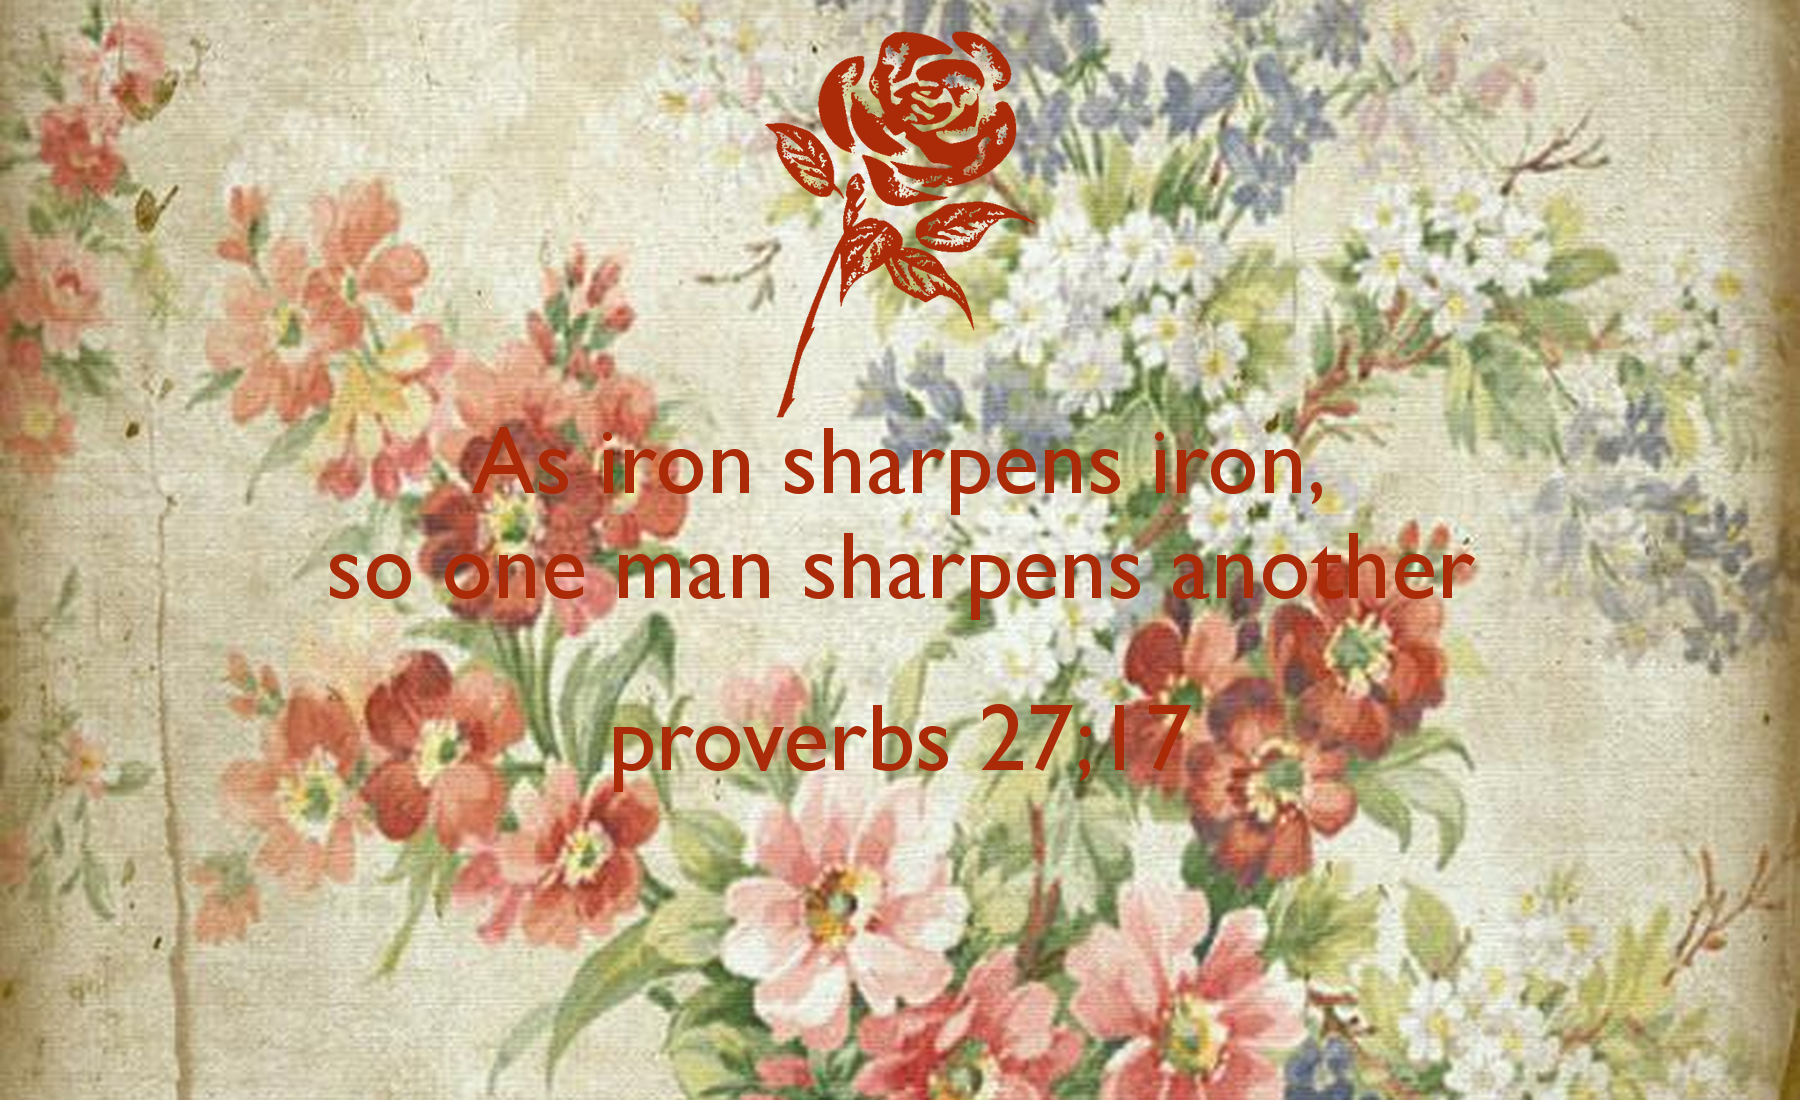 As iron sharpens iron so one man sharpens another proverbs 2717 1800x1100